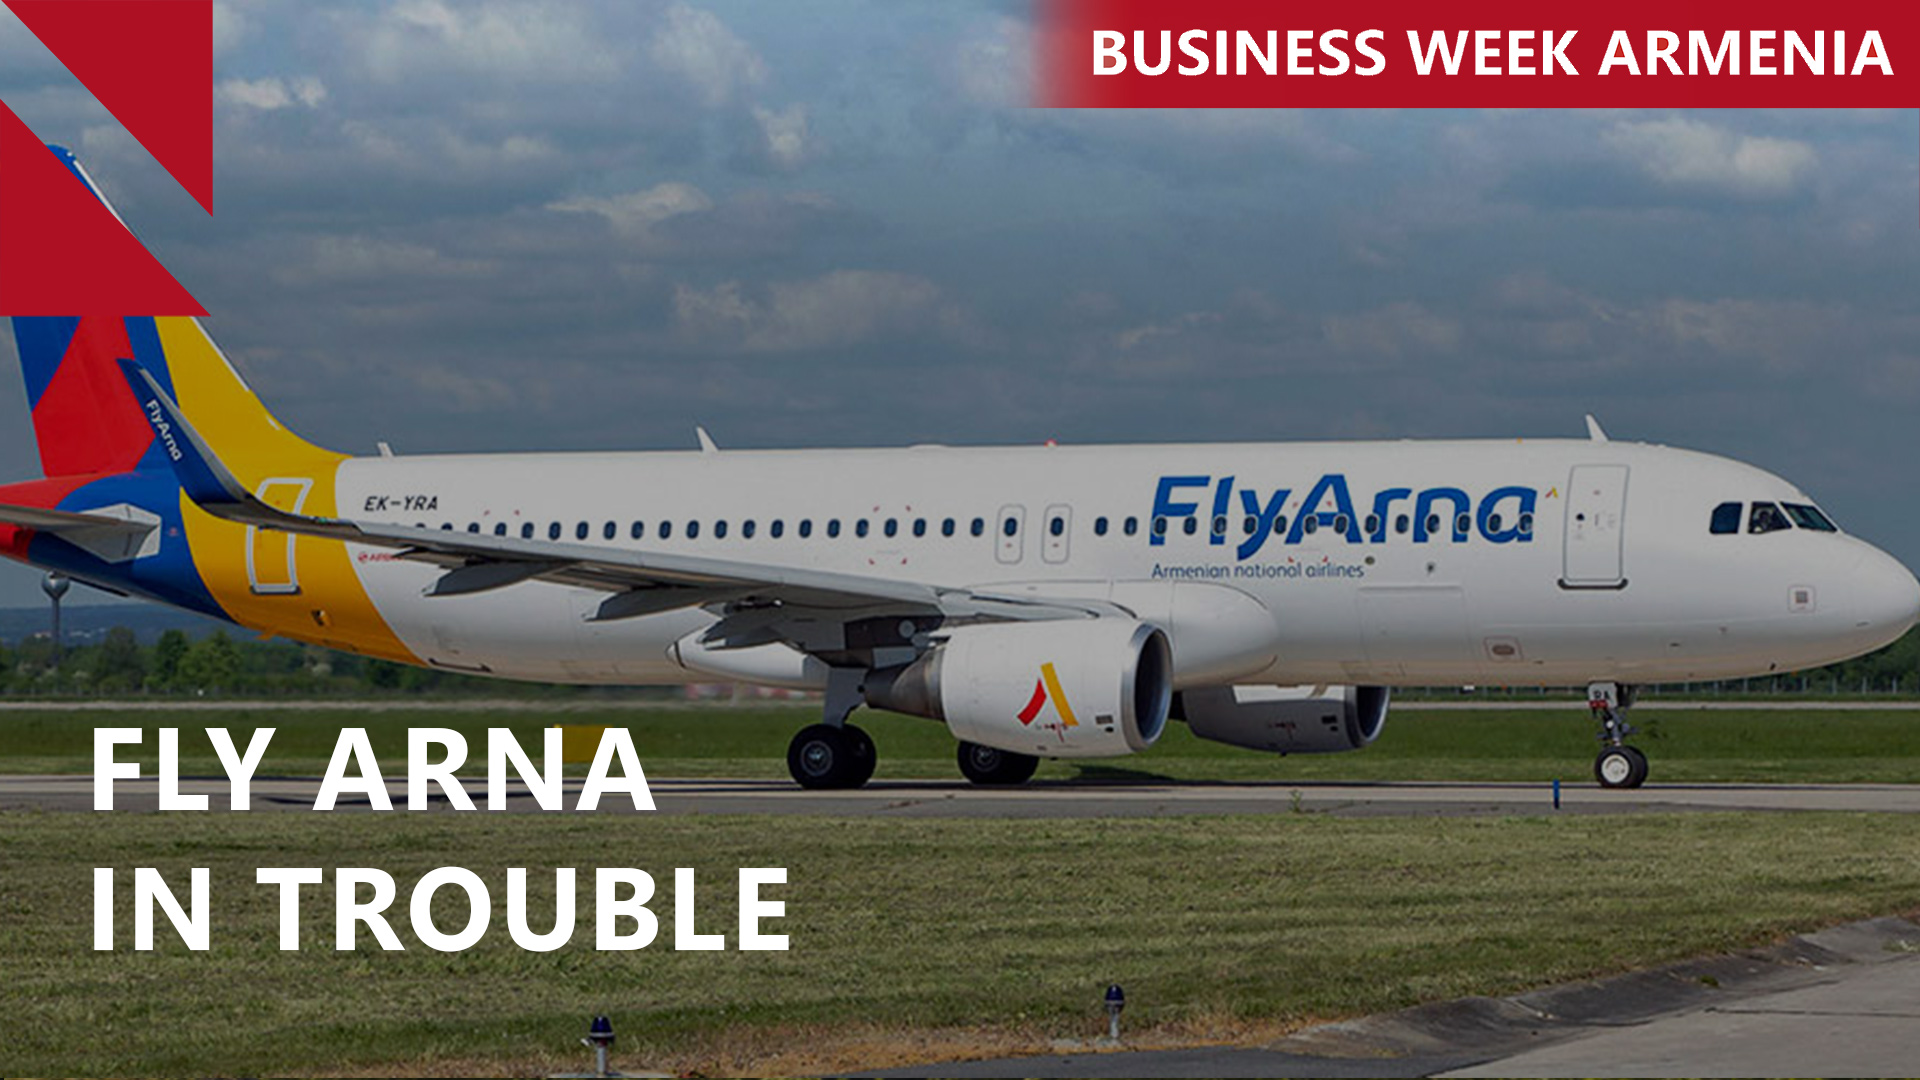 Armenian national airline’s license suspended as financial issues mount: THIS WEEK IN BUSINESS